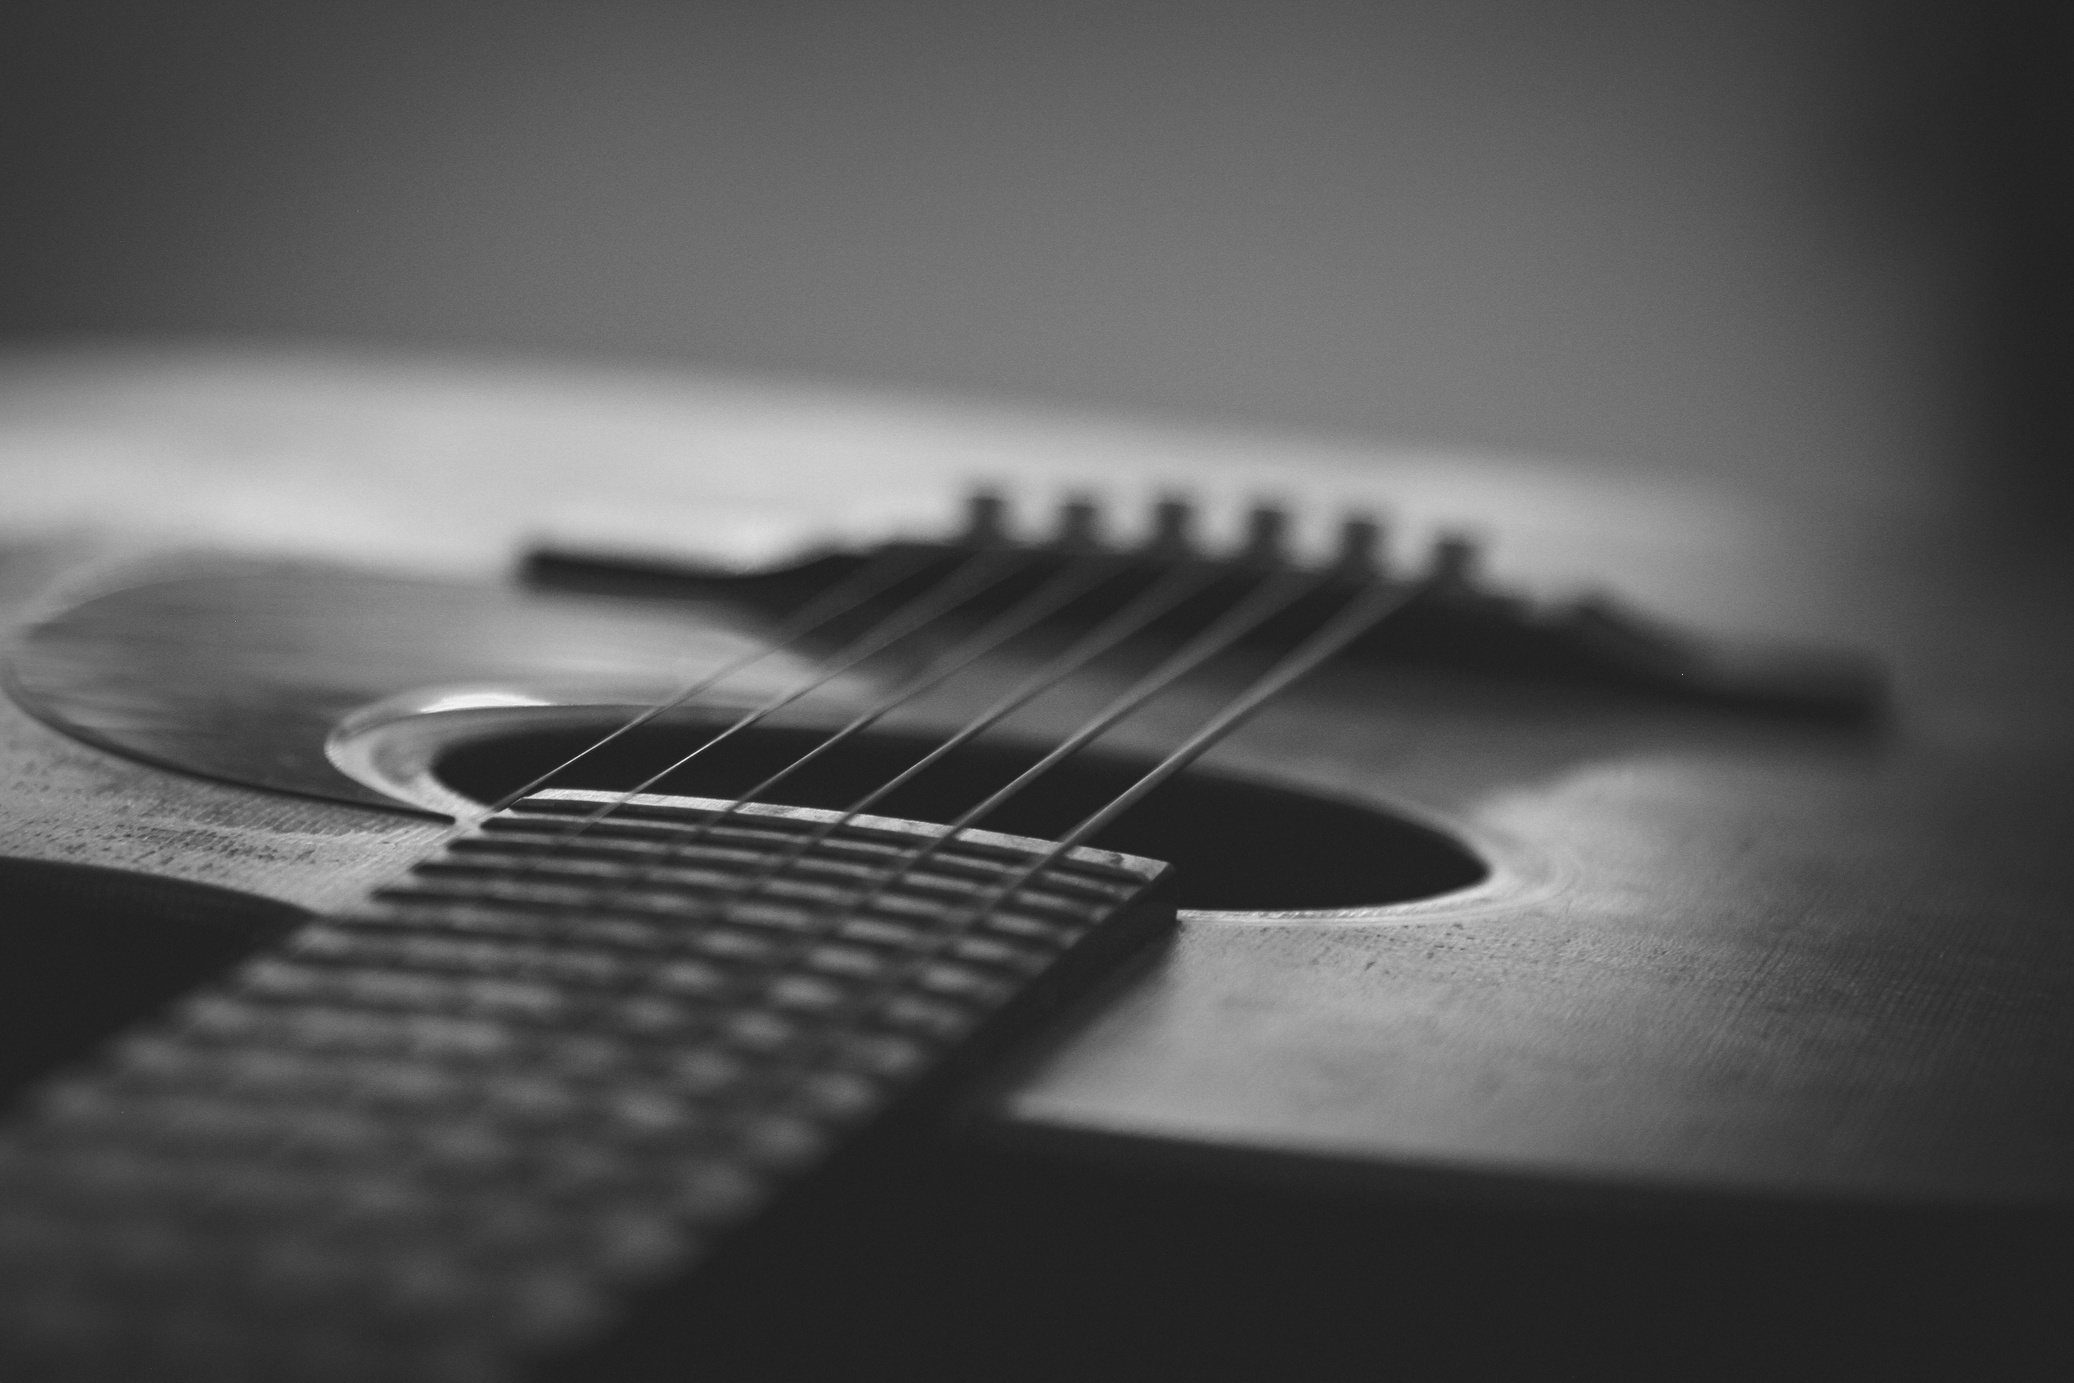 Grayscale Photo of an Acoustic Guitar